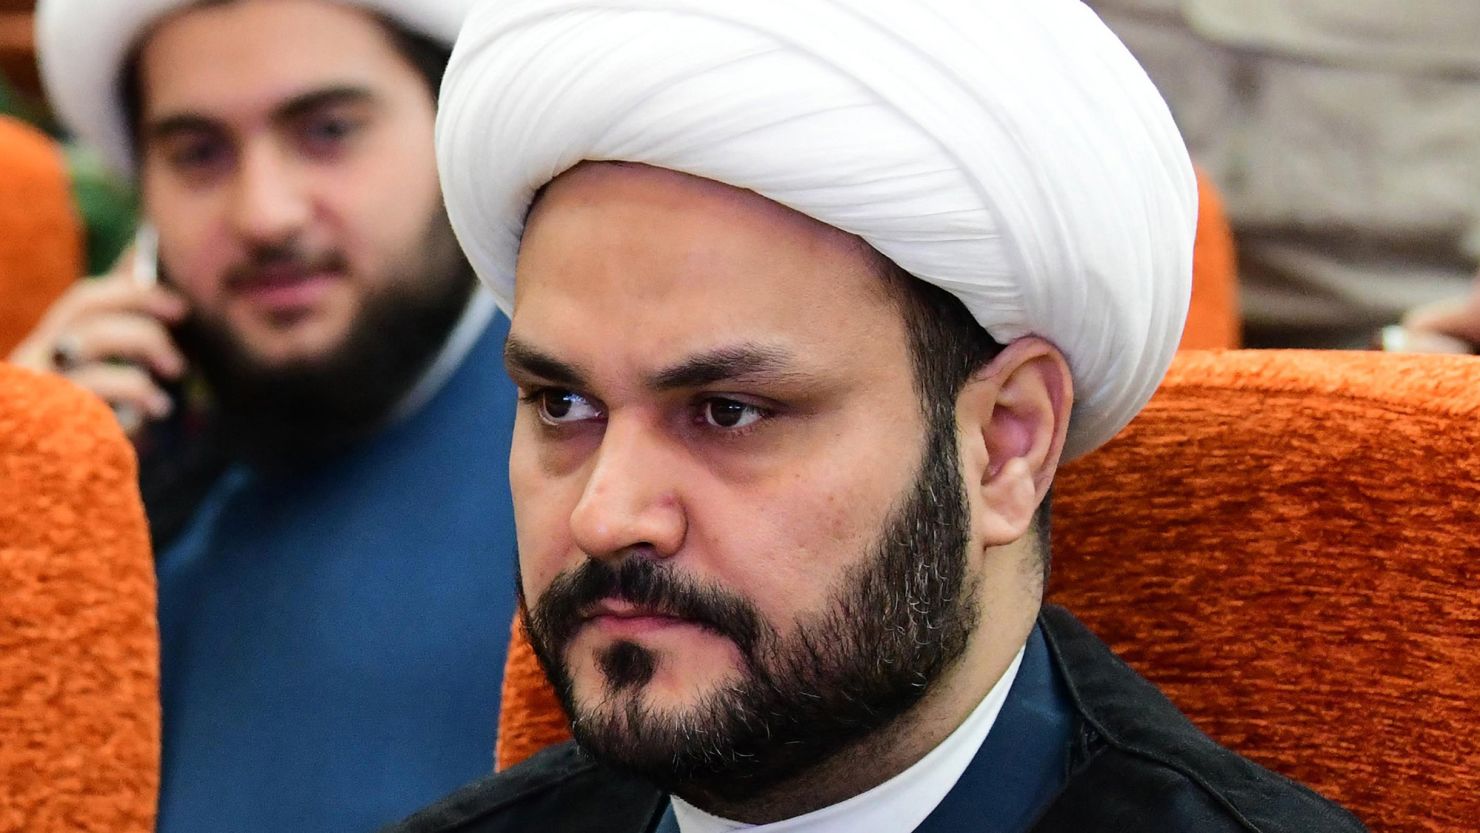 Sheikh Akram Al-Kaabi, leader of the Al-Nujaba militant group, attends a ceremony honoring members of Iran's Revolutionary Guards killed in Iraq, on April 24, 2019.